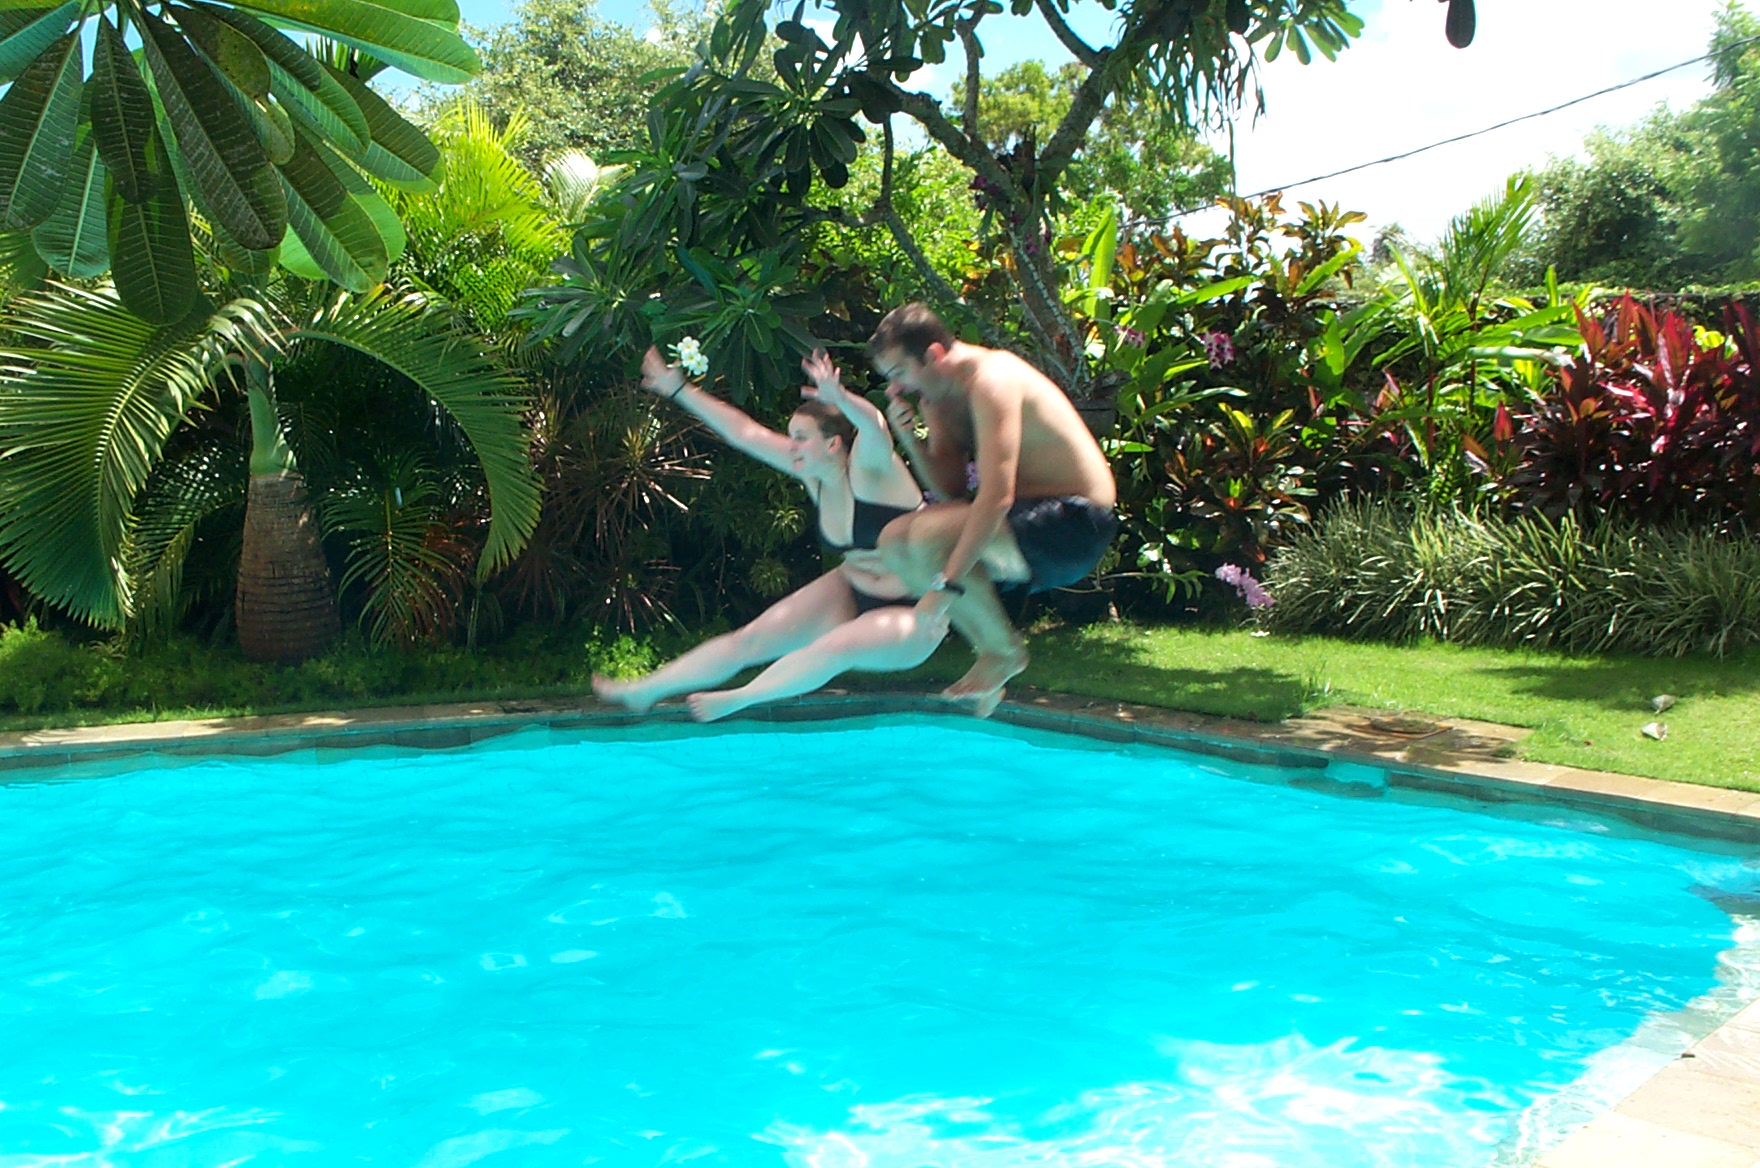 two men in swim suits jumping into a pool